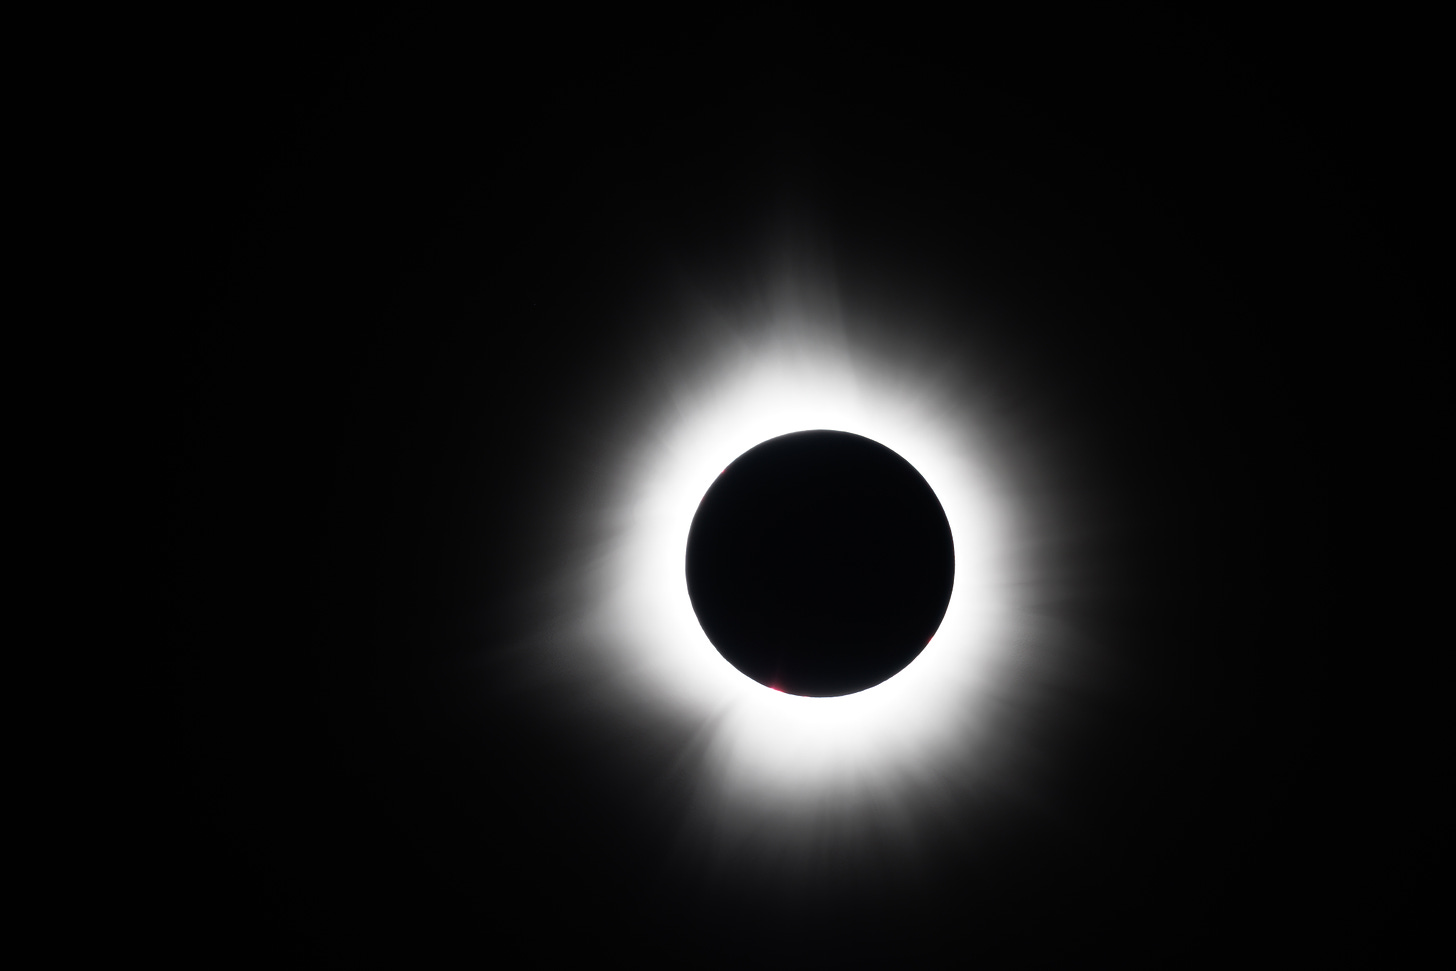 Totality: the moon is completely covering the sun; it’s a dark circle surrounded by the white glow of the corona.